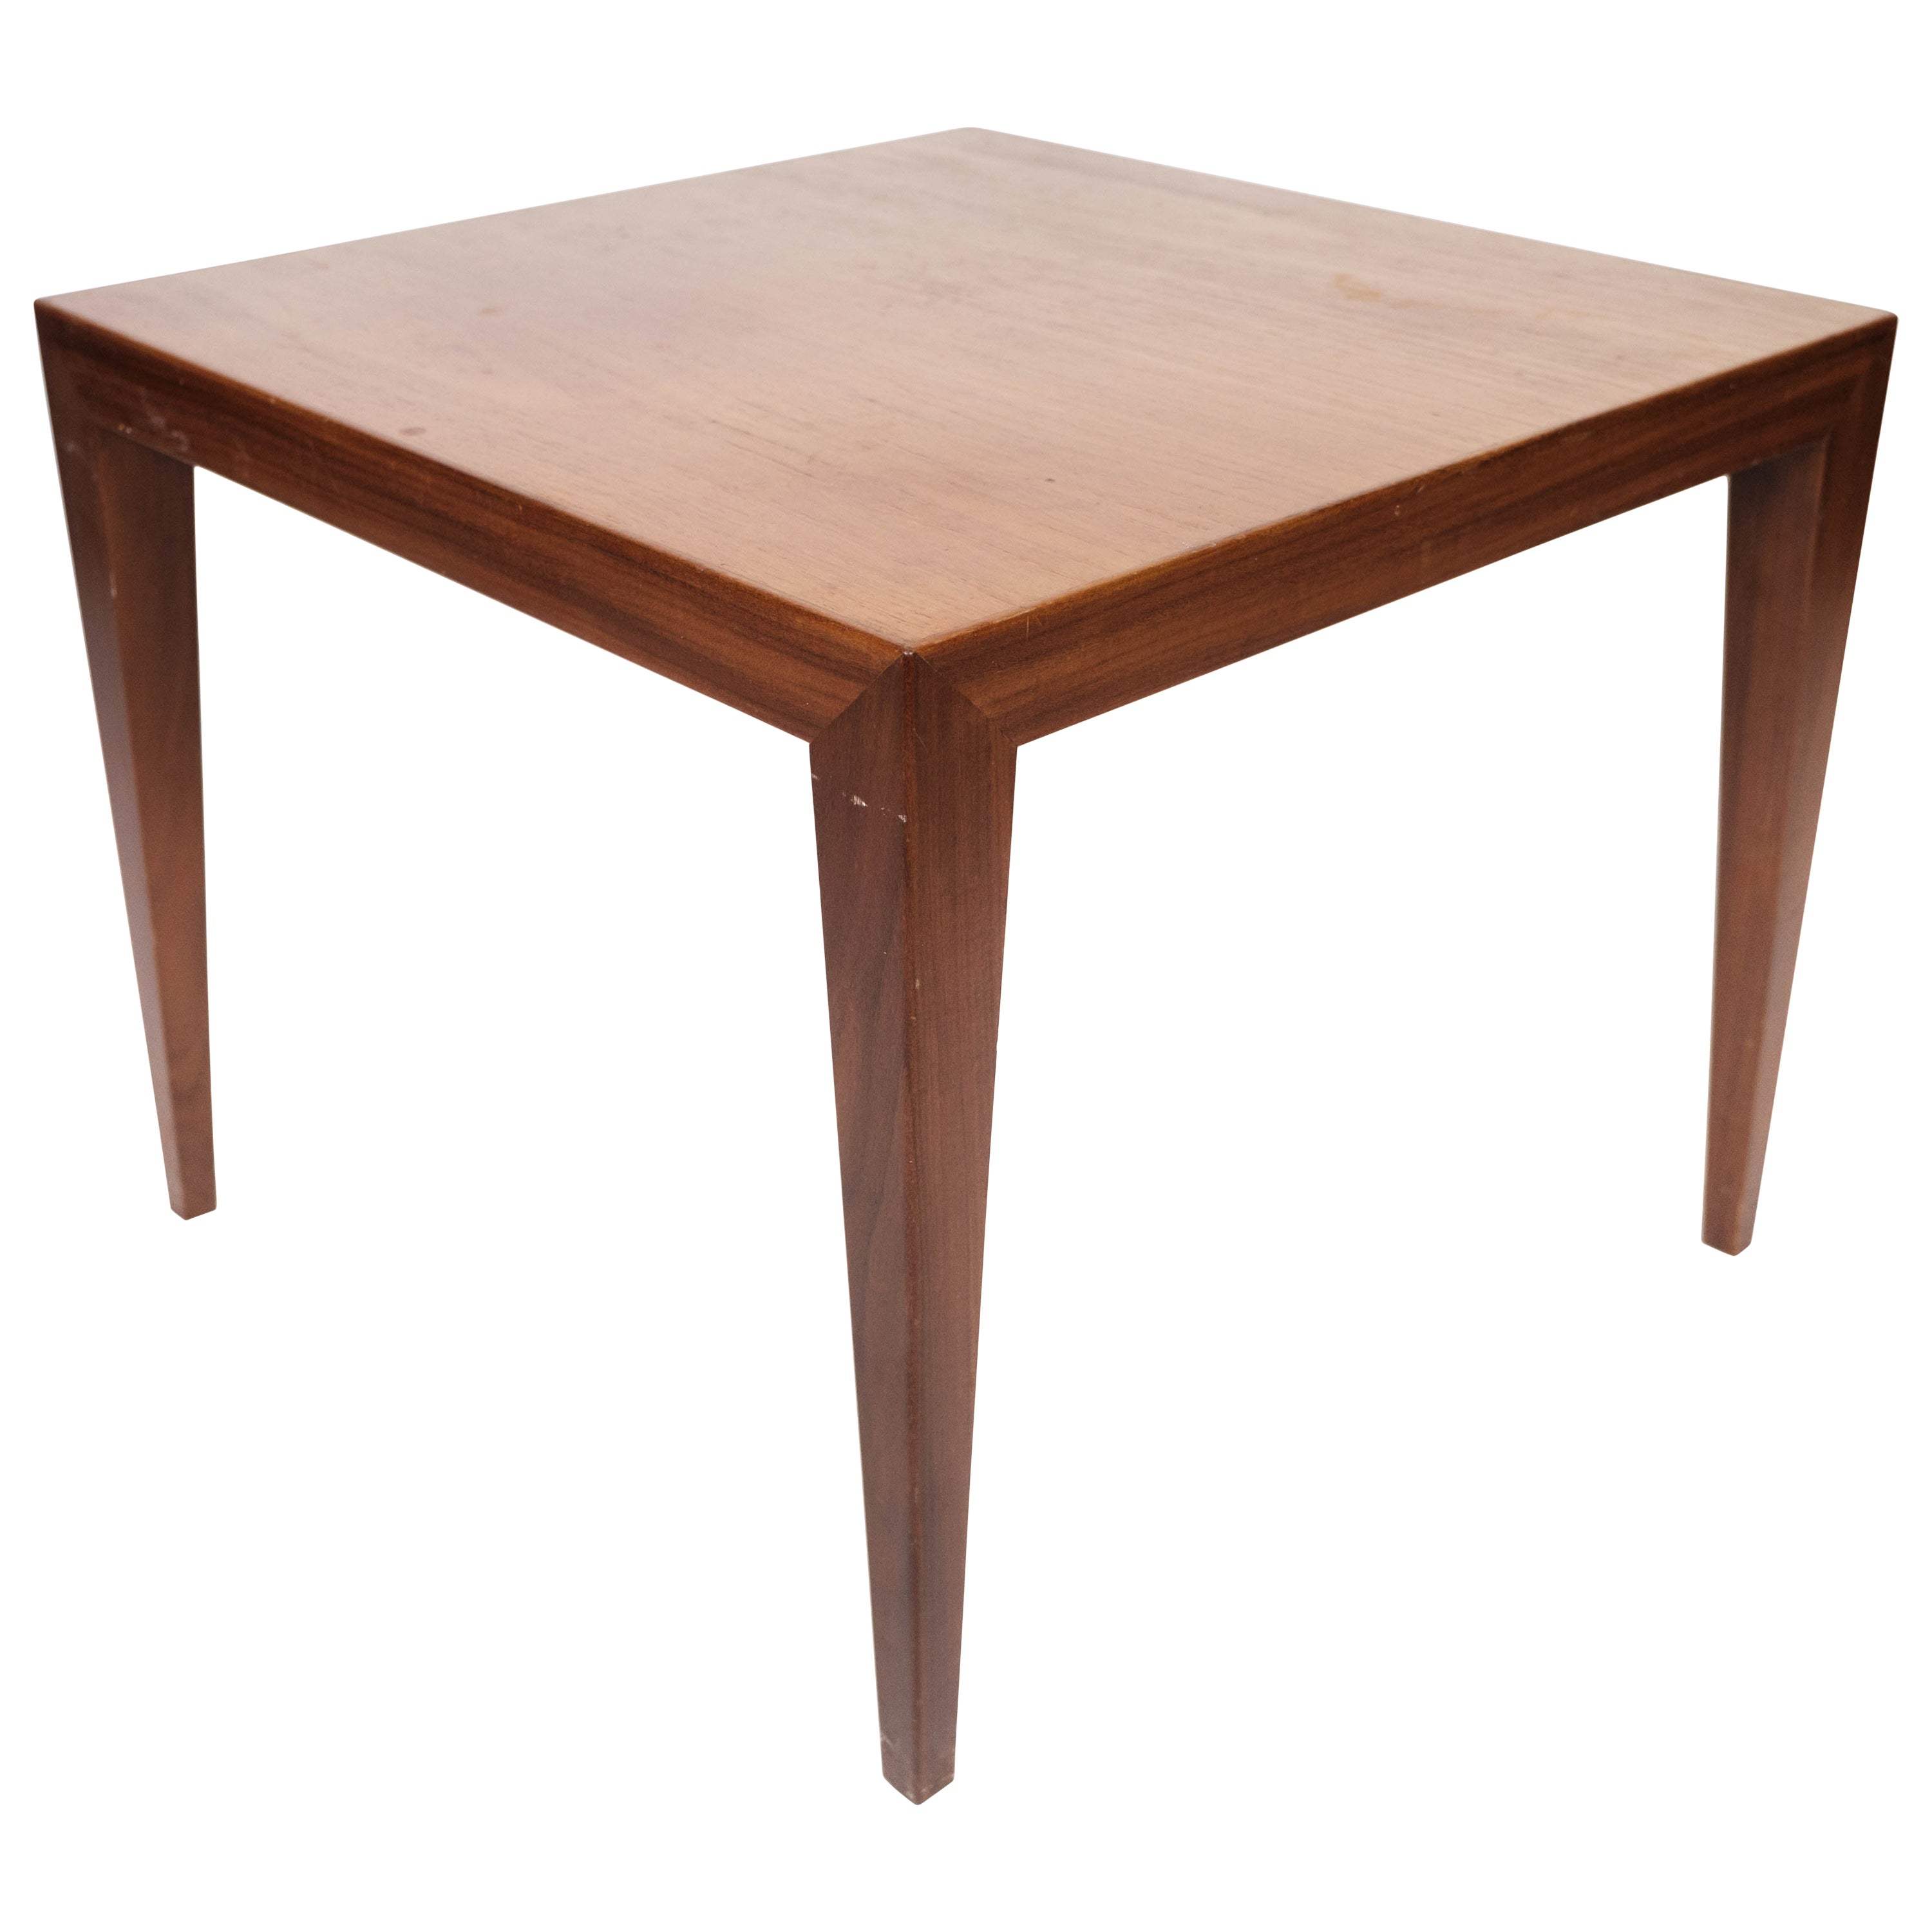 Side Table in Teak of Danish Design Manufactured by Haslev Furniture, 1960s For Sale